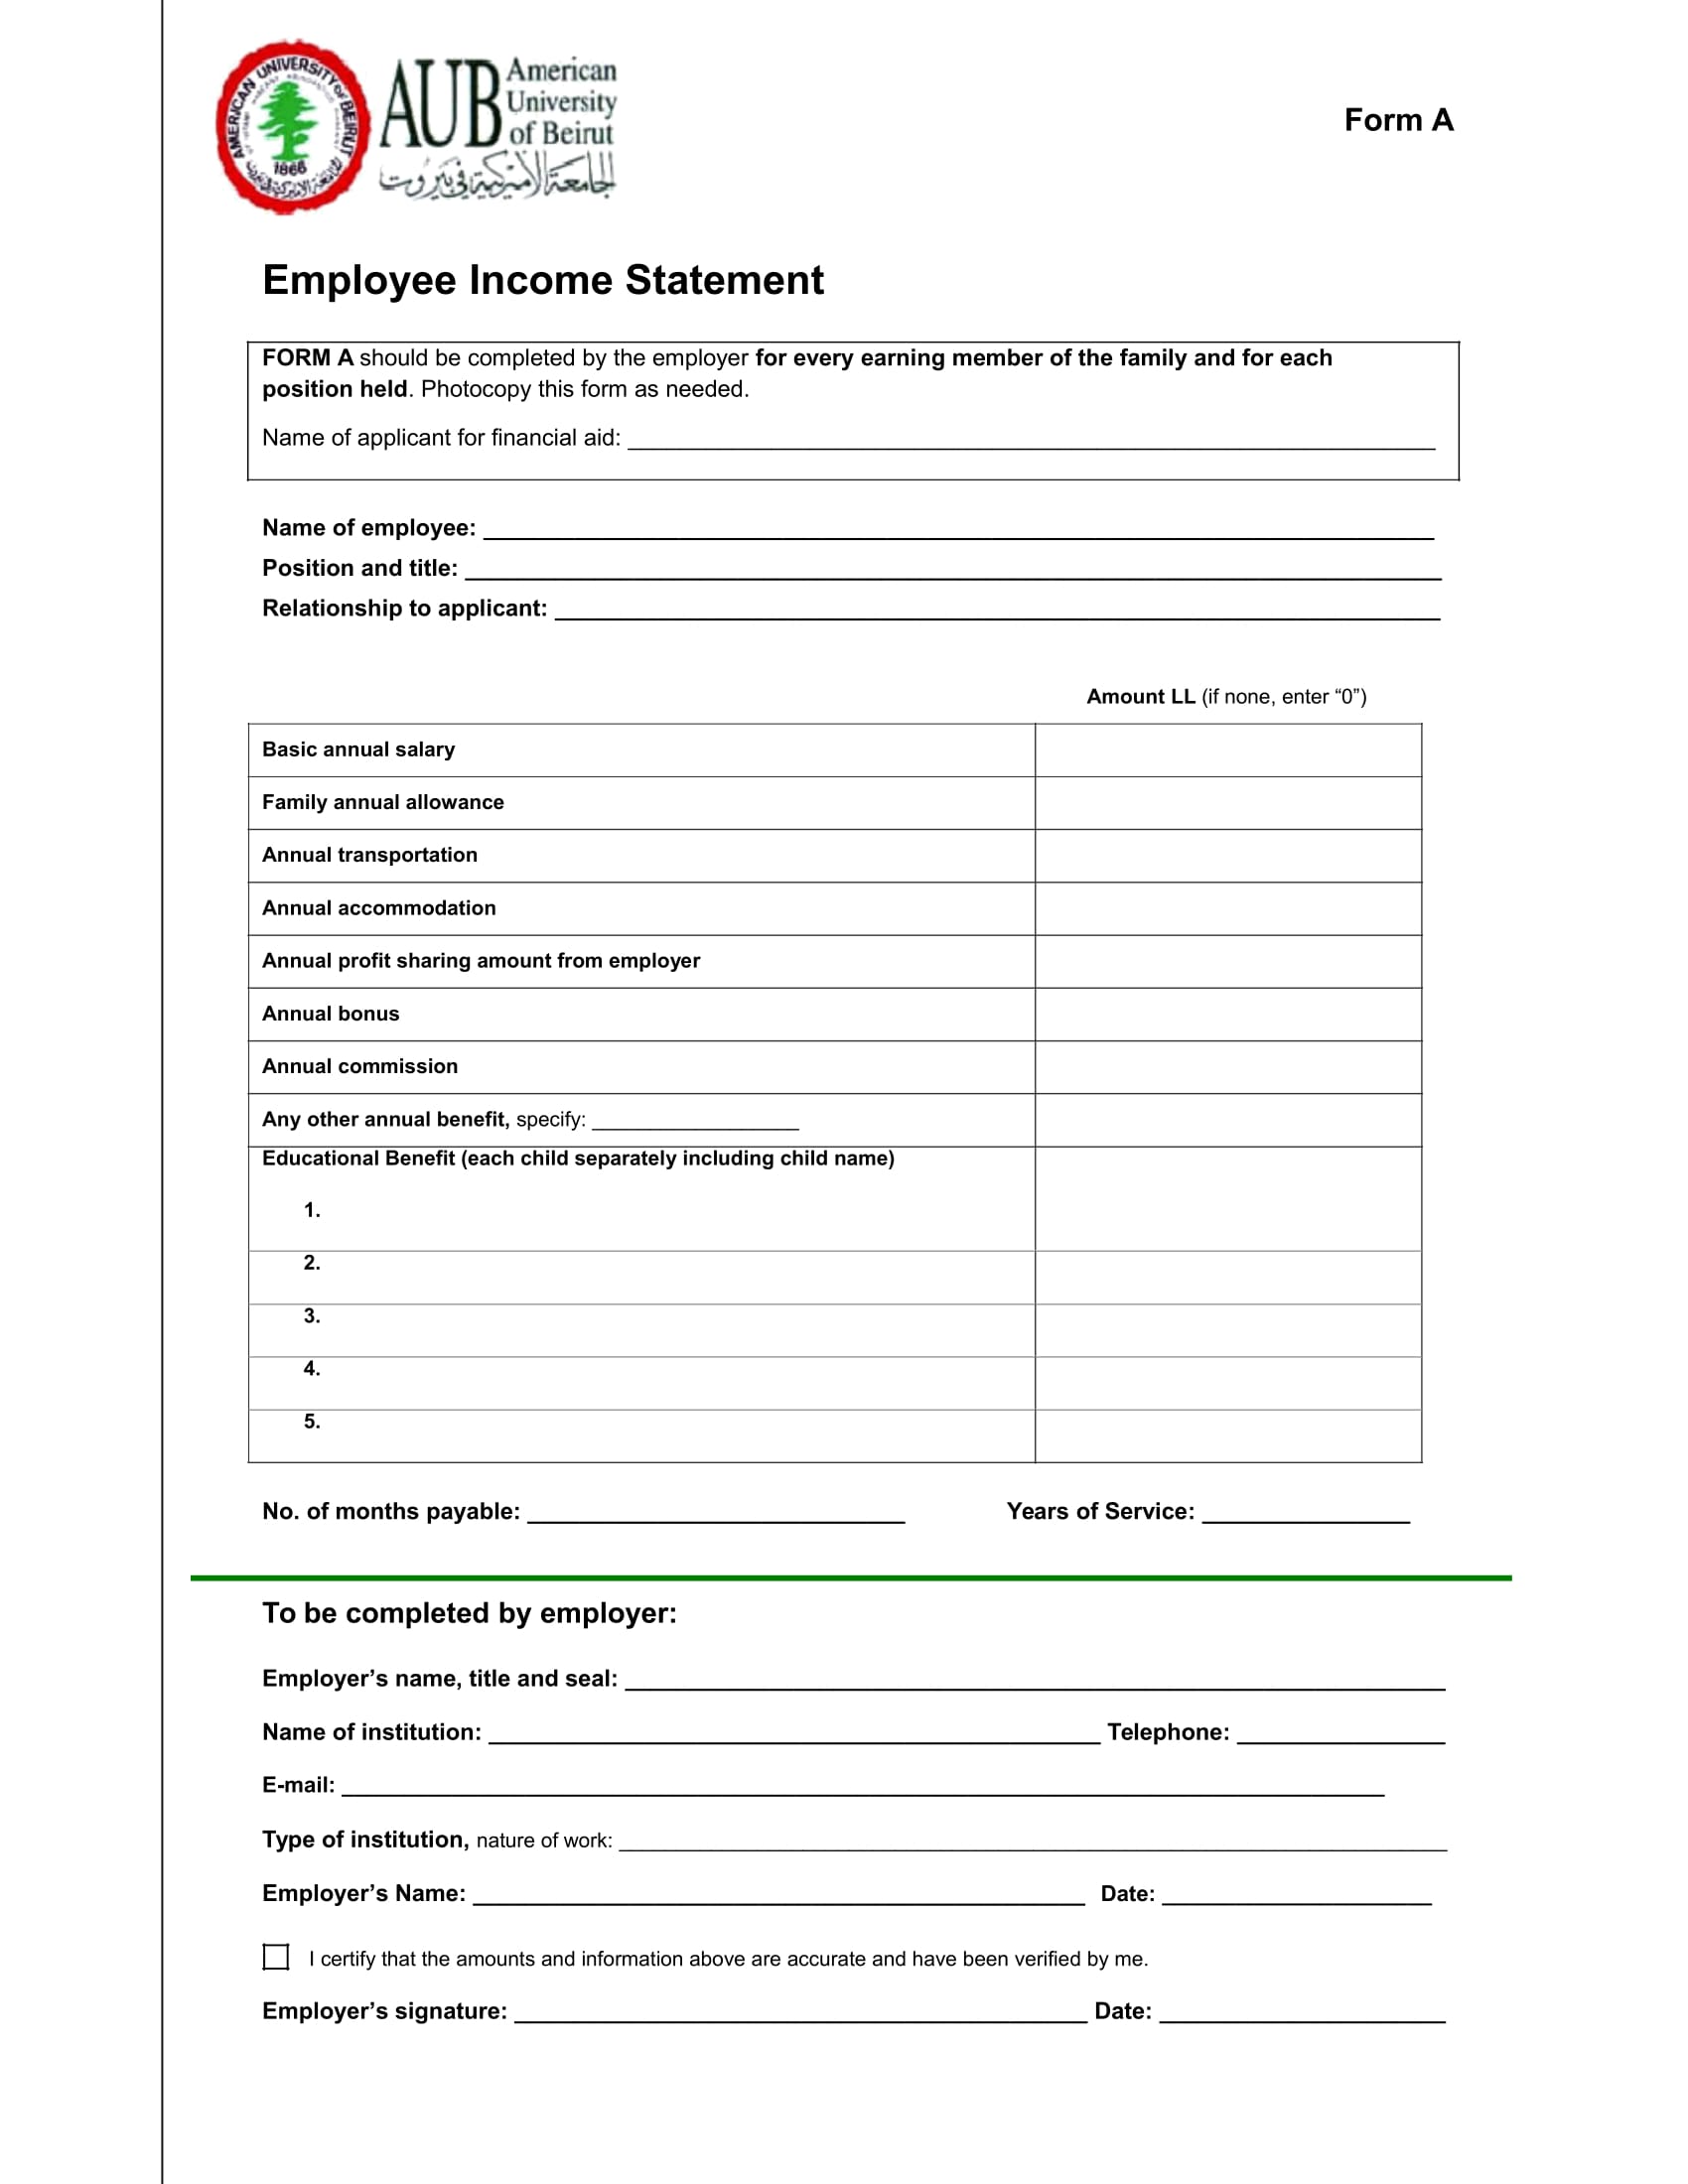 income statement form sample 1